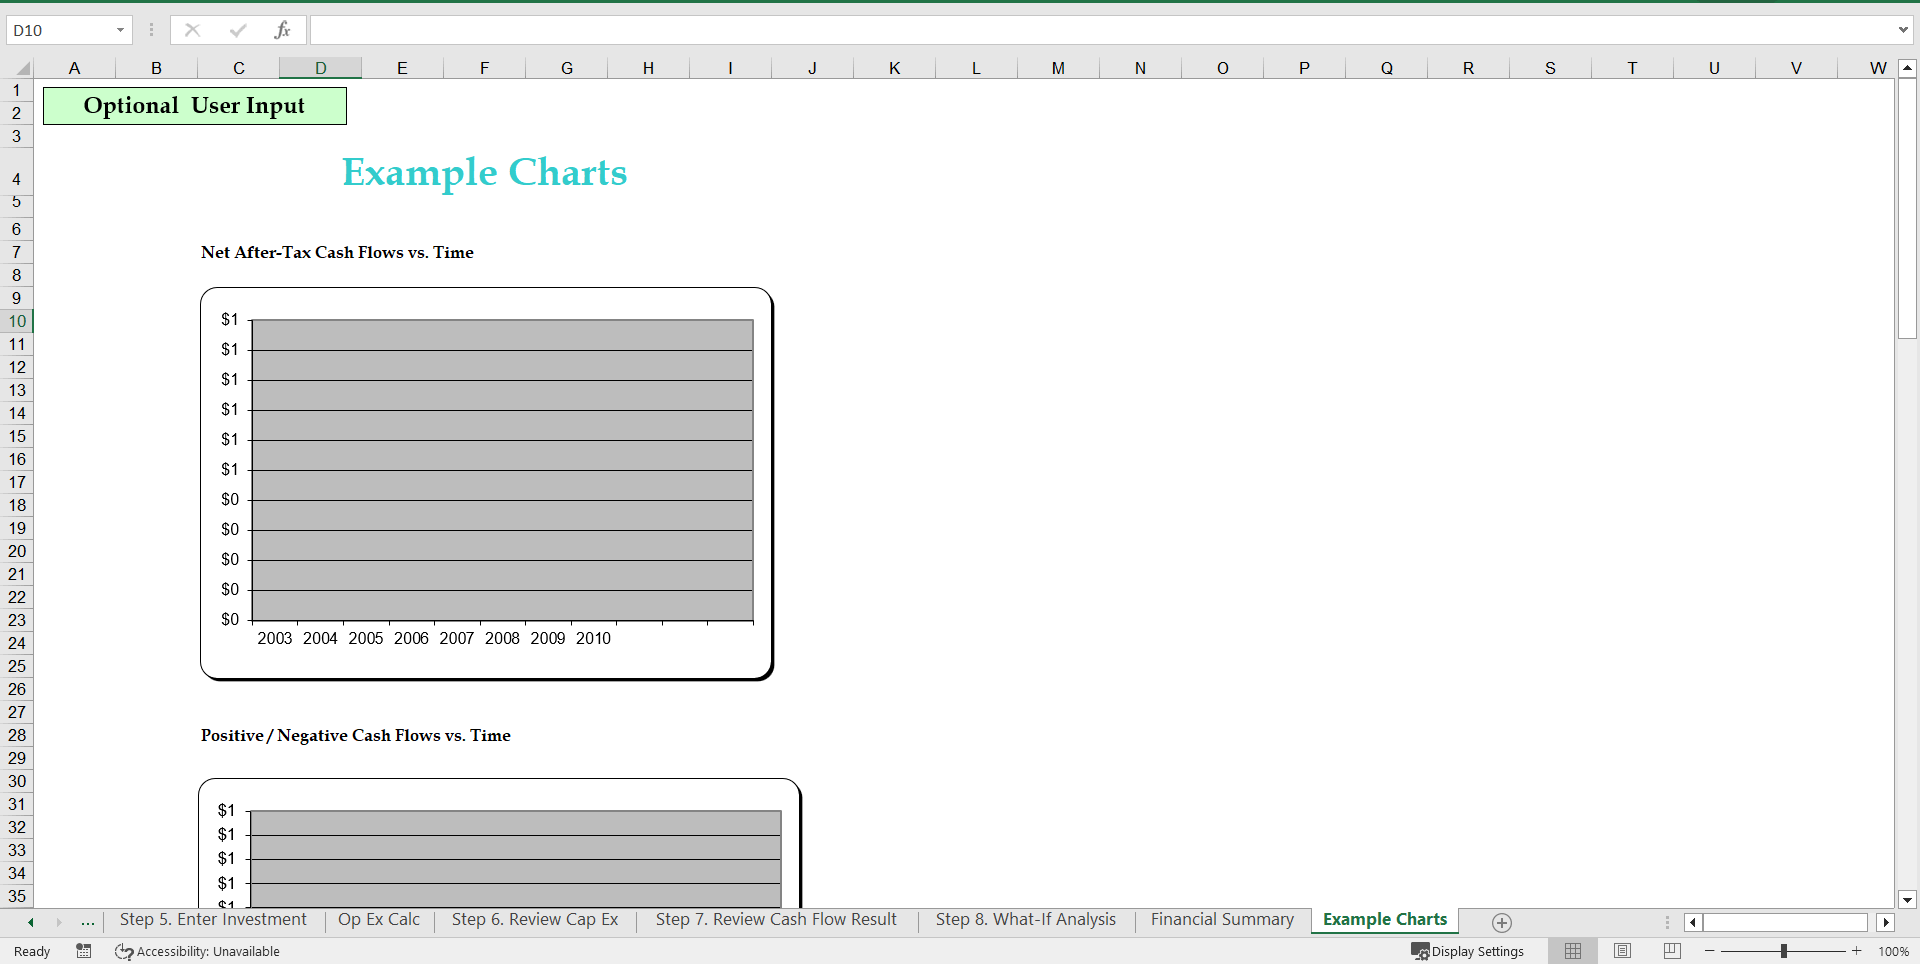 Business Case Template Excel (Excel) Slideshow View